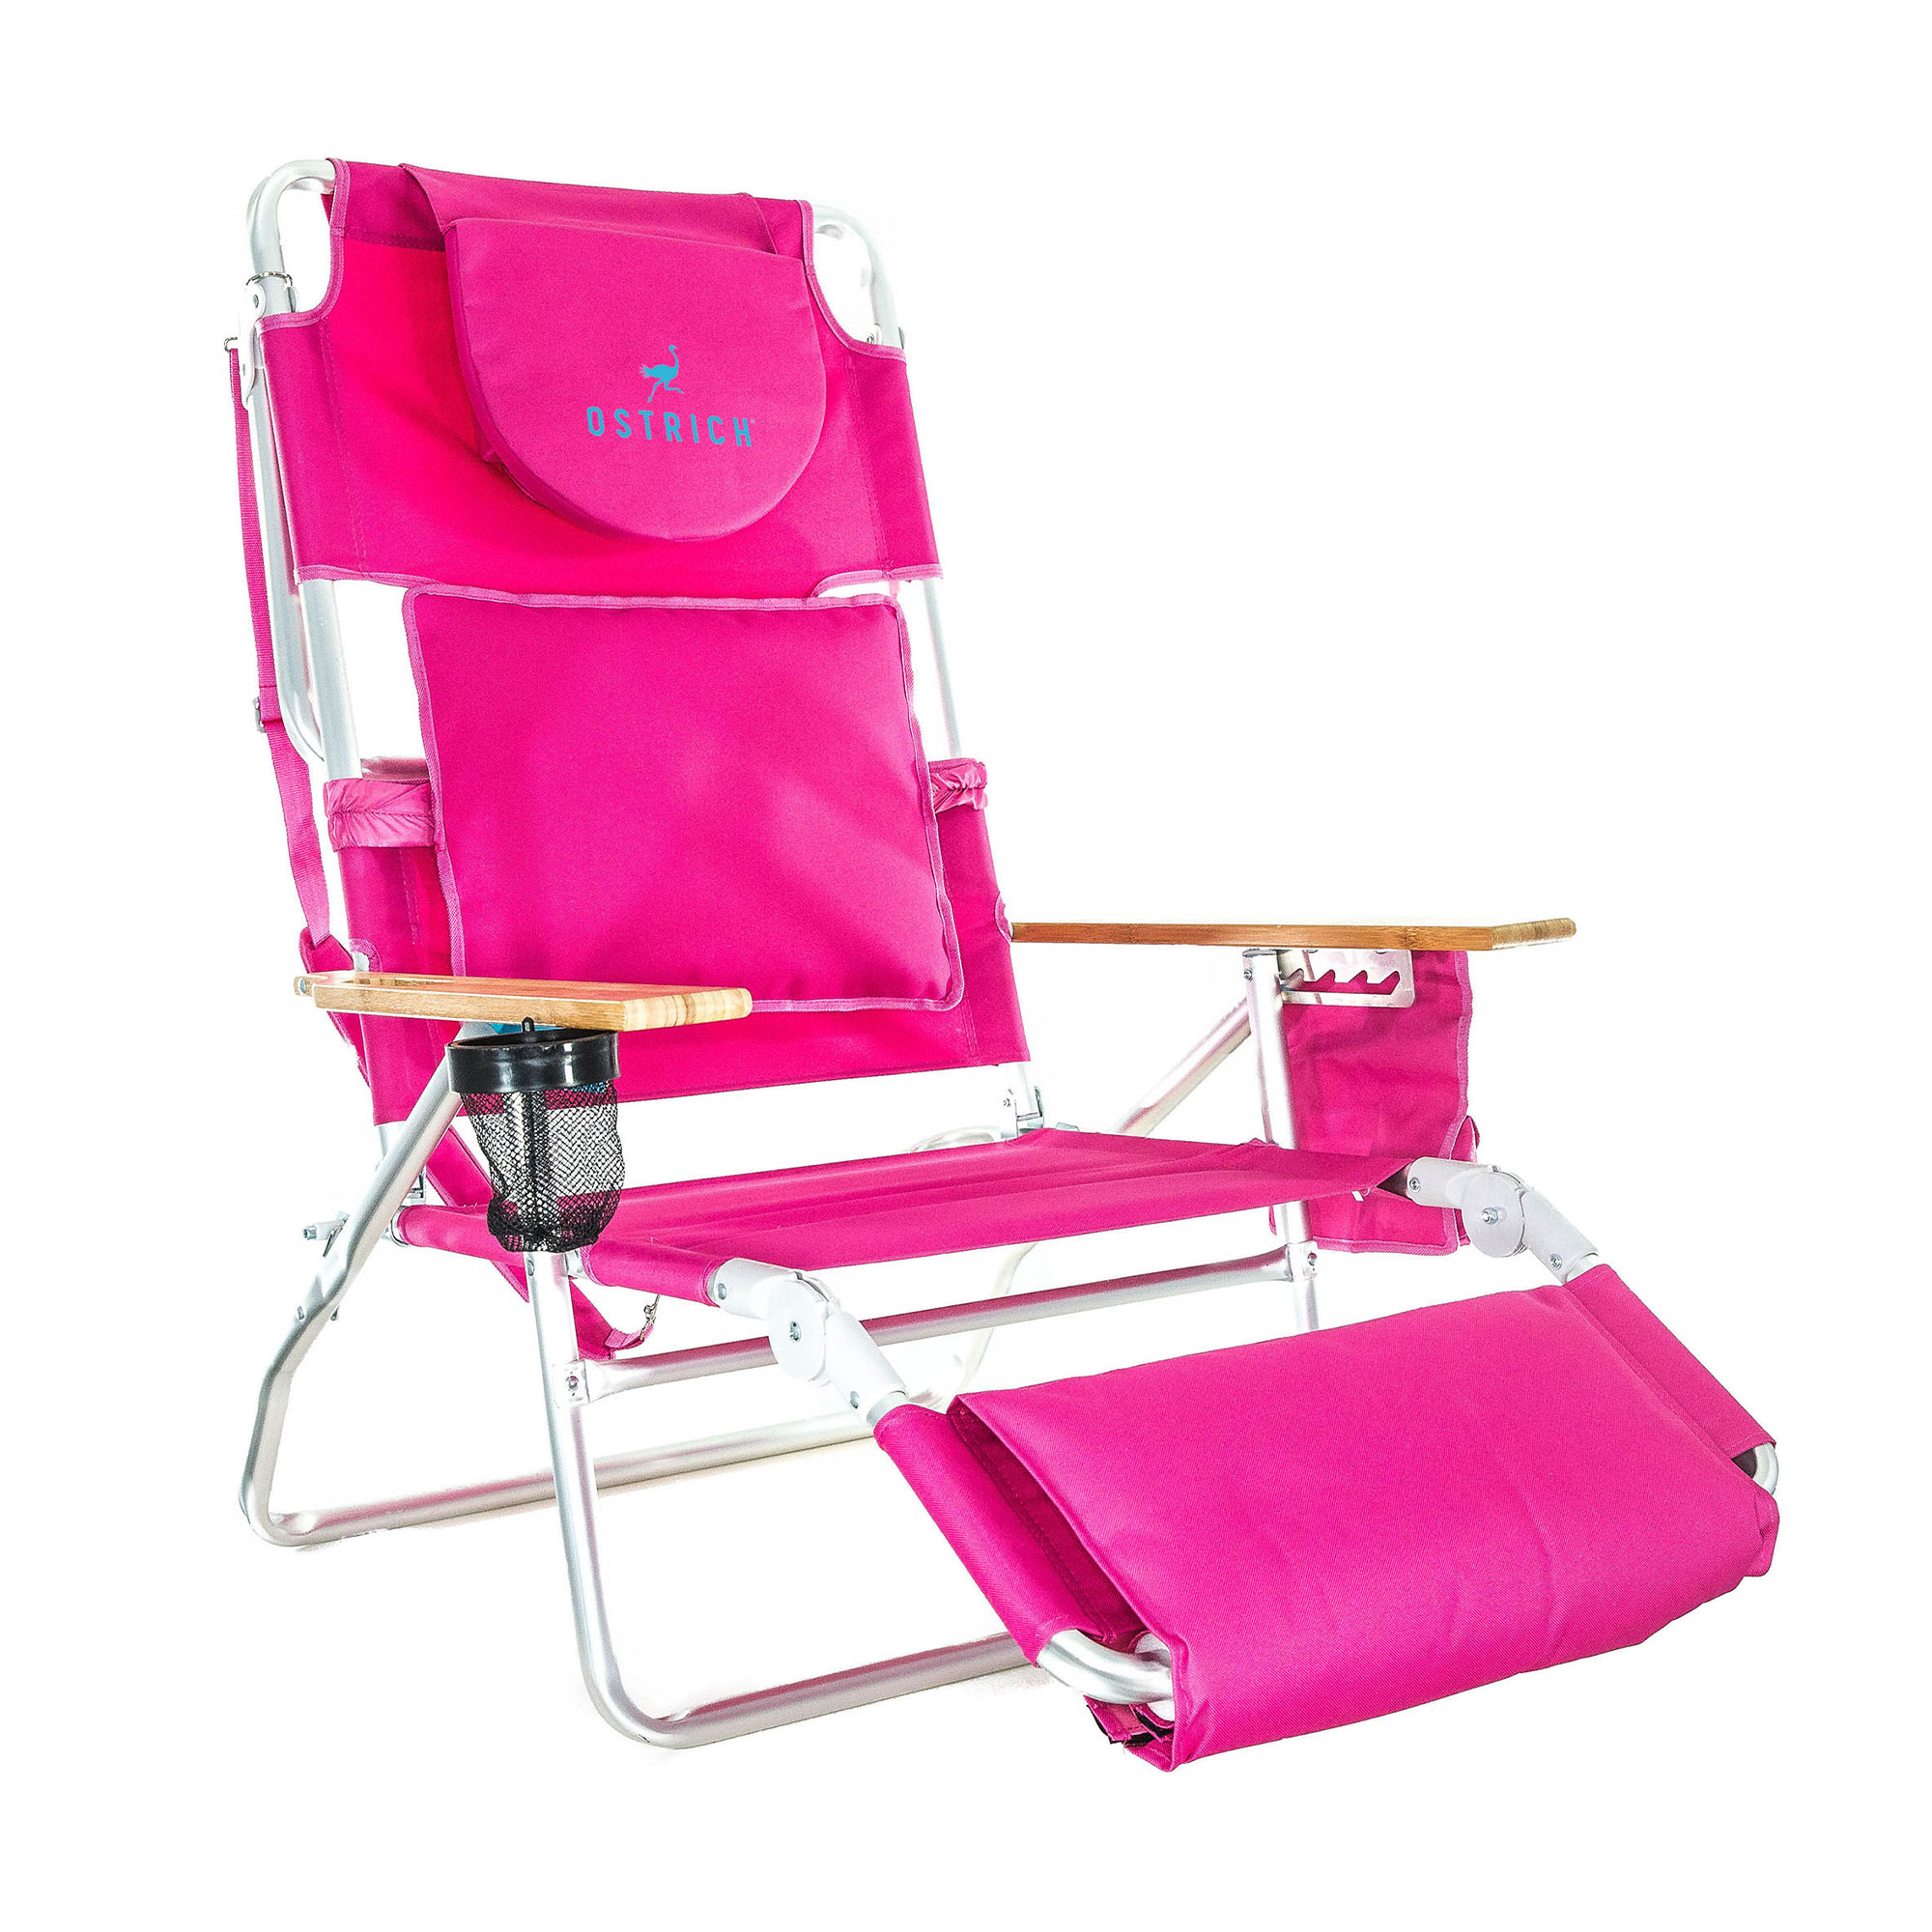 Ostrich Deluxe 3N1 Lightweight Outdoor Beach Lounge Chair w/Footrest, Pink - image 1 of 9